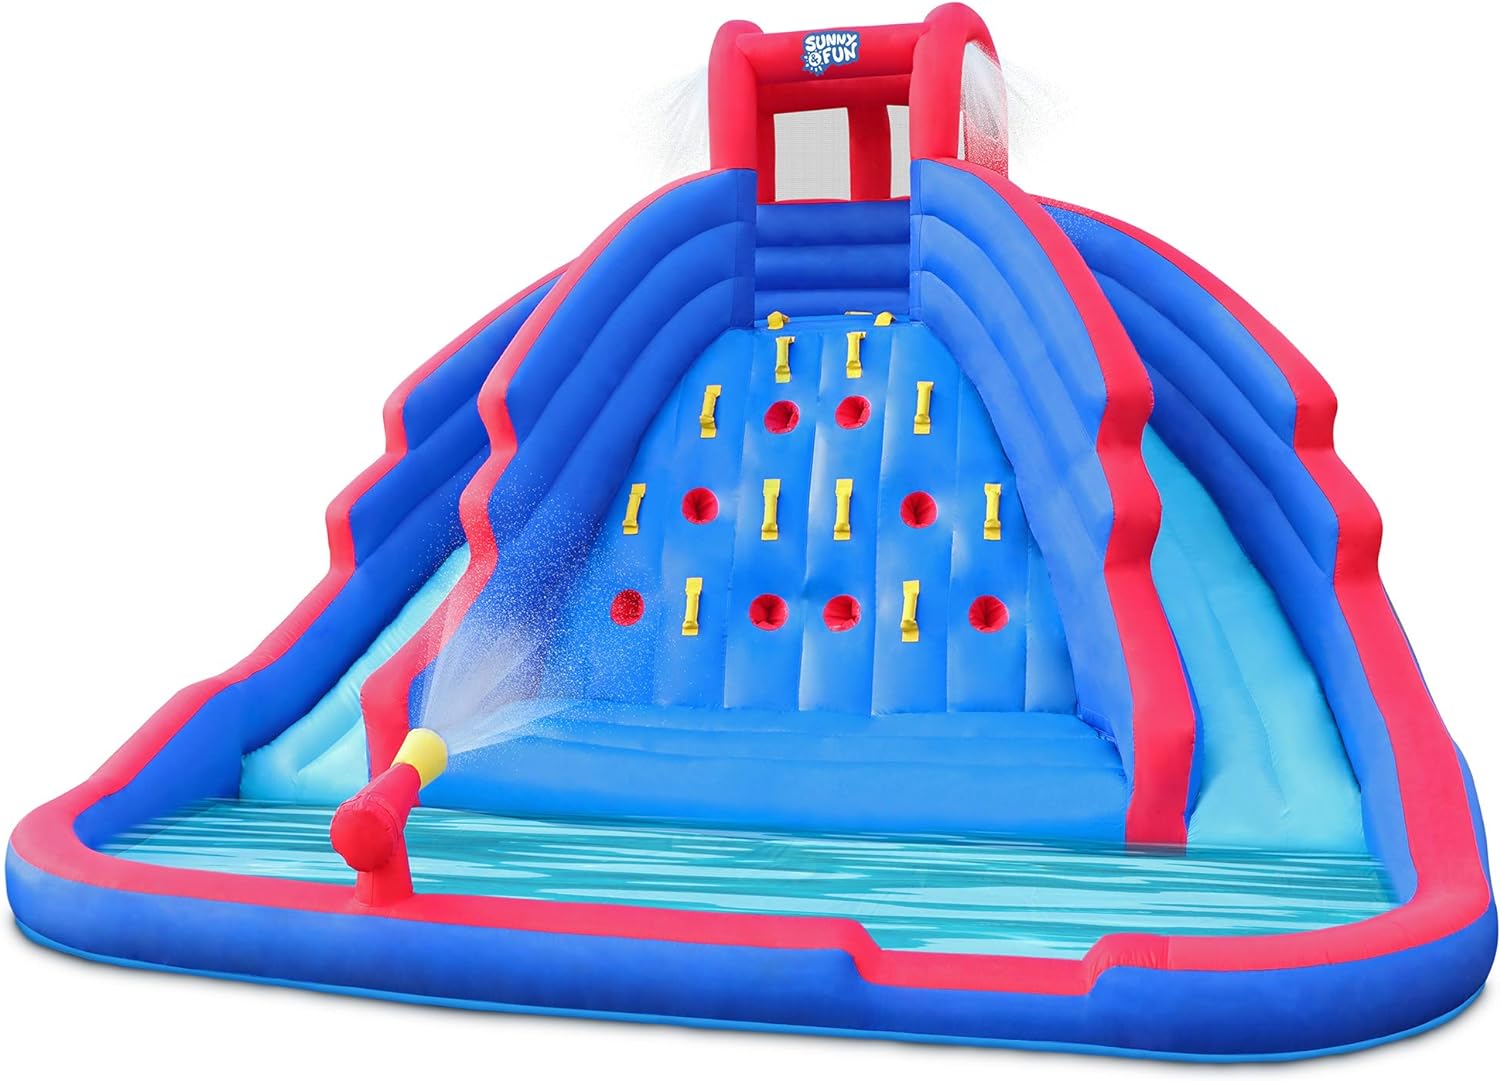 SUNNY & FUN Ultra Climber Inflatable Water Slide Park  Heavy-Duty for Outdoor Fun - Climbing Wall, Two Slides & Splash Pool  Easy to Set Up & Inflate with Included Air Pump & Carrying Case